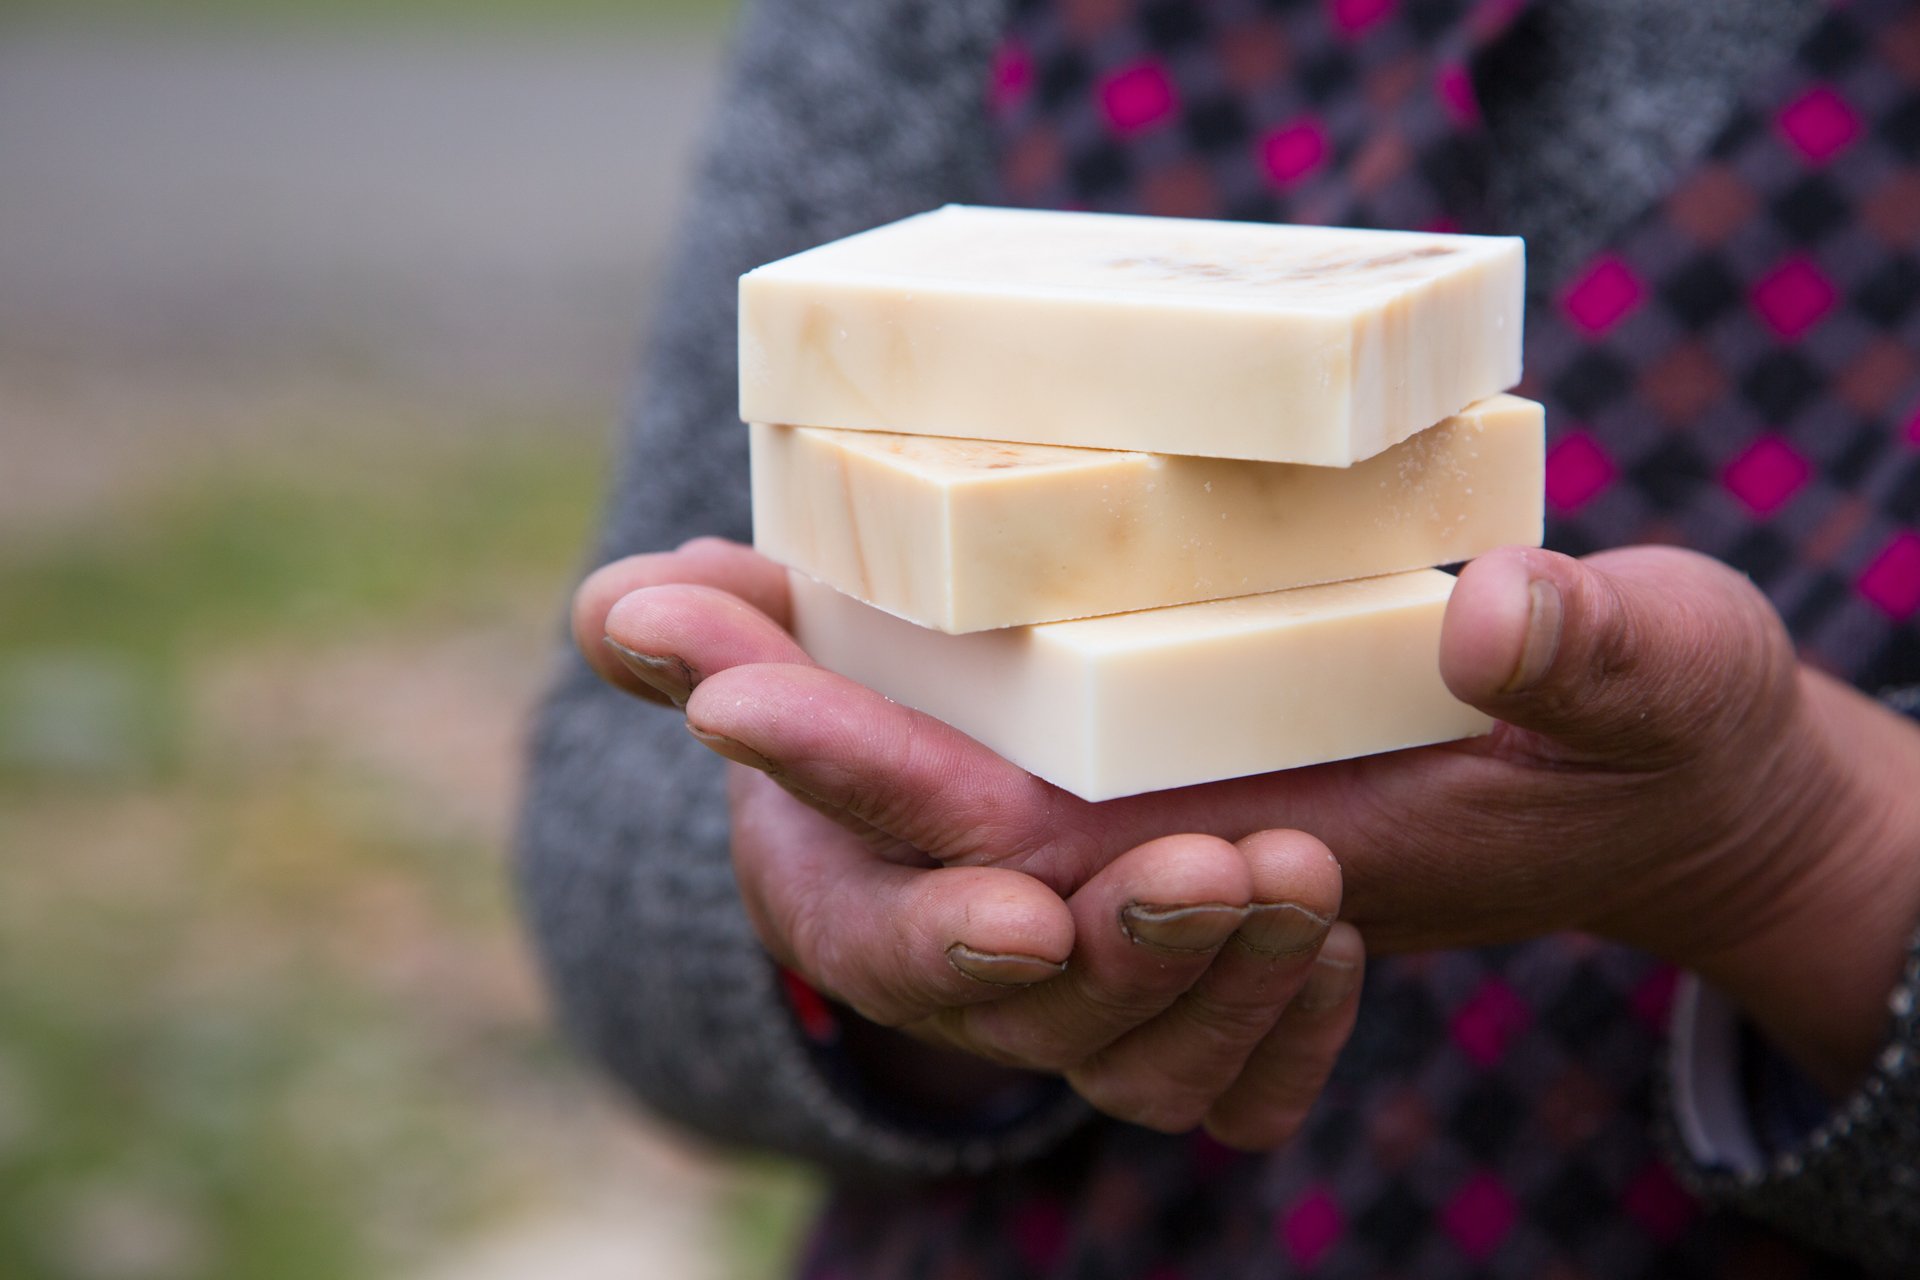  Yakma is a handmade, all-natural yak milk soap made by women of the Tibetan plateau. The social enterprise gives women an opportunity for economic independence and aims to build a safe and supportive environment for them. July 2019 // Shot for Yakma